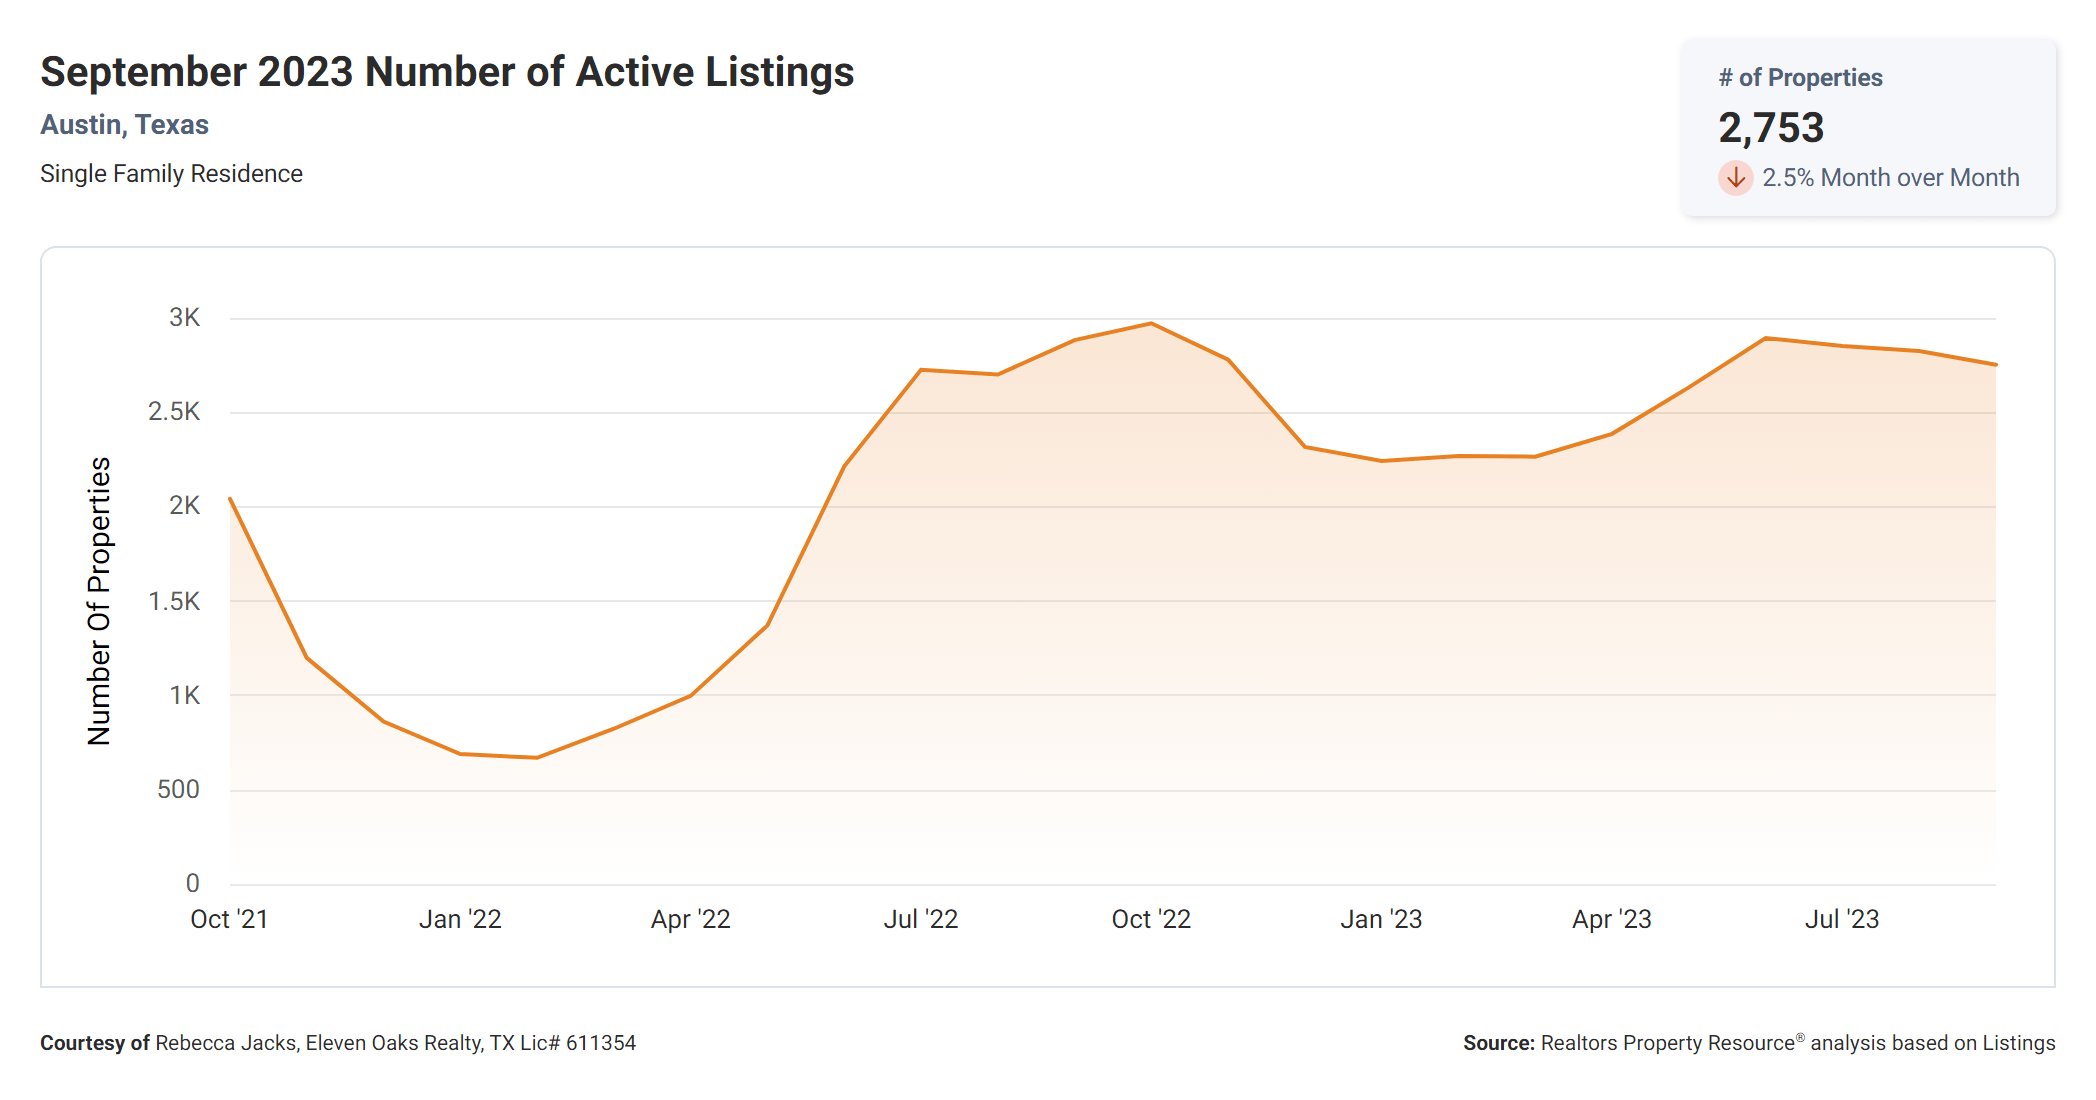 September 2023 austin tx number of active listings